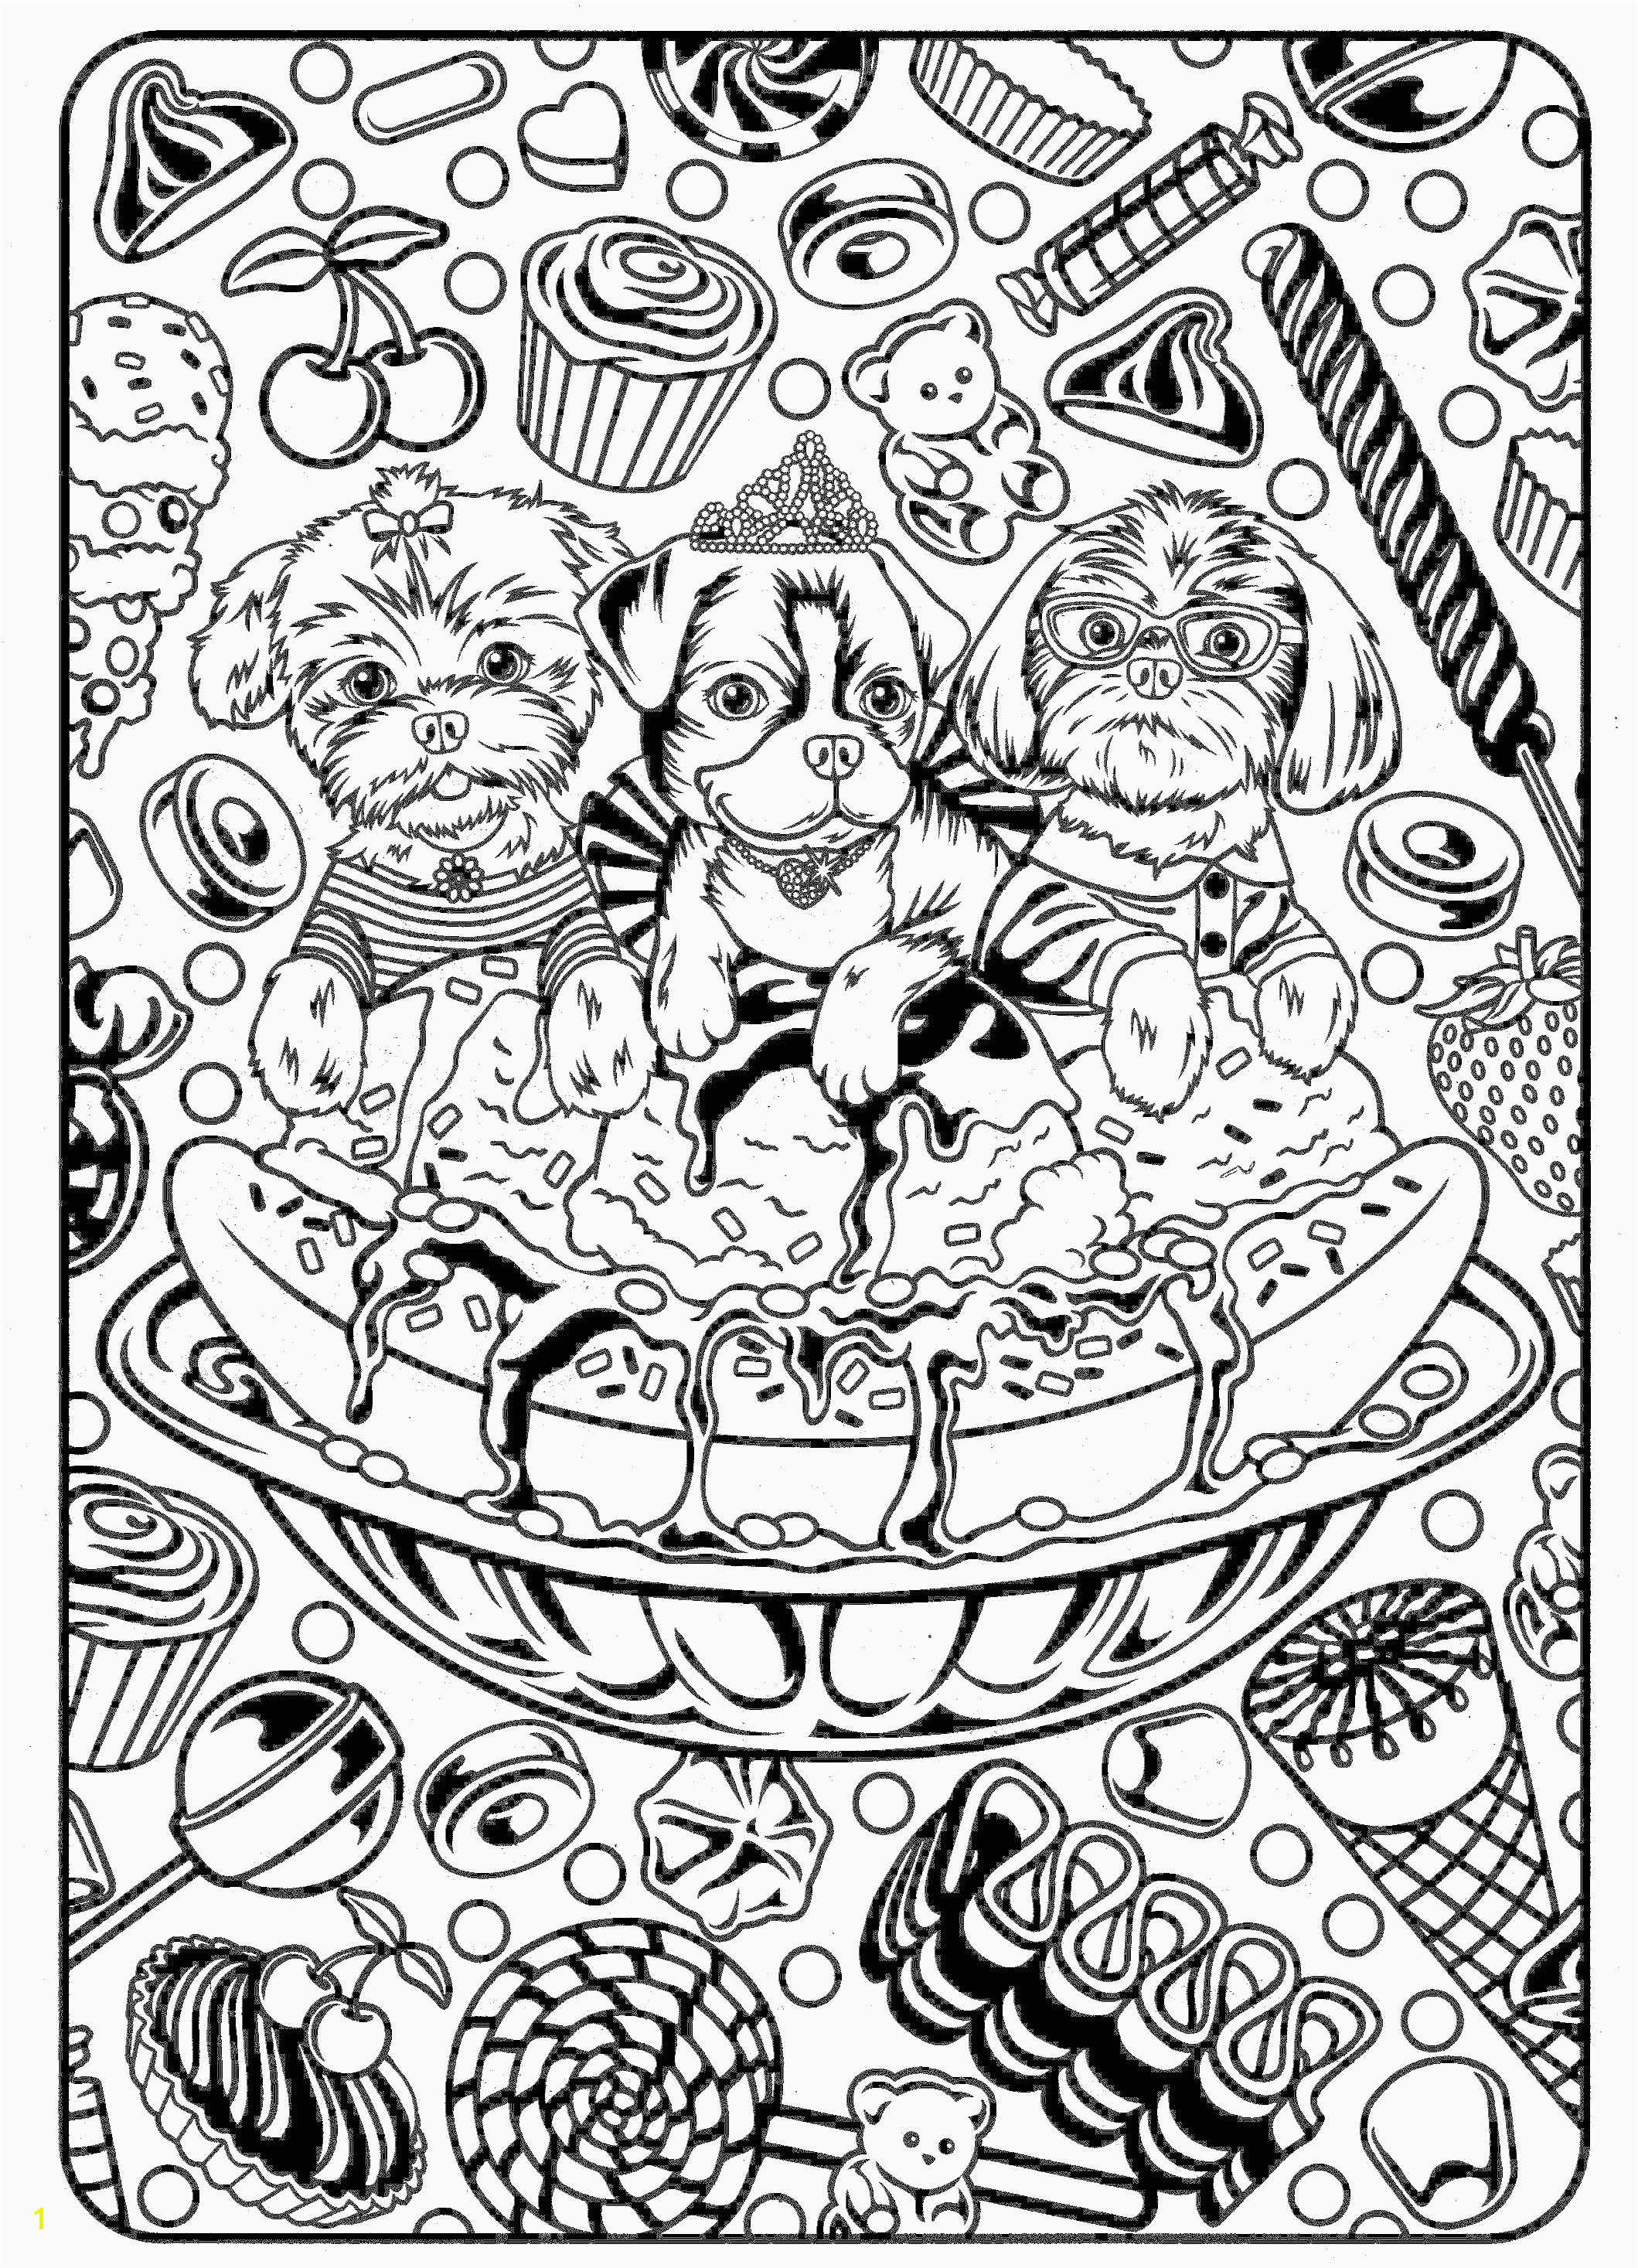 Coloring Pages Of Haunted Houses Haunted House Coloring Pages Free Printable Enticing Coloring Pages